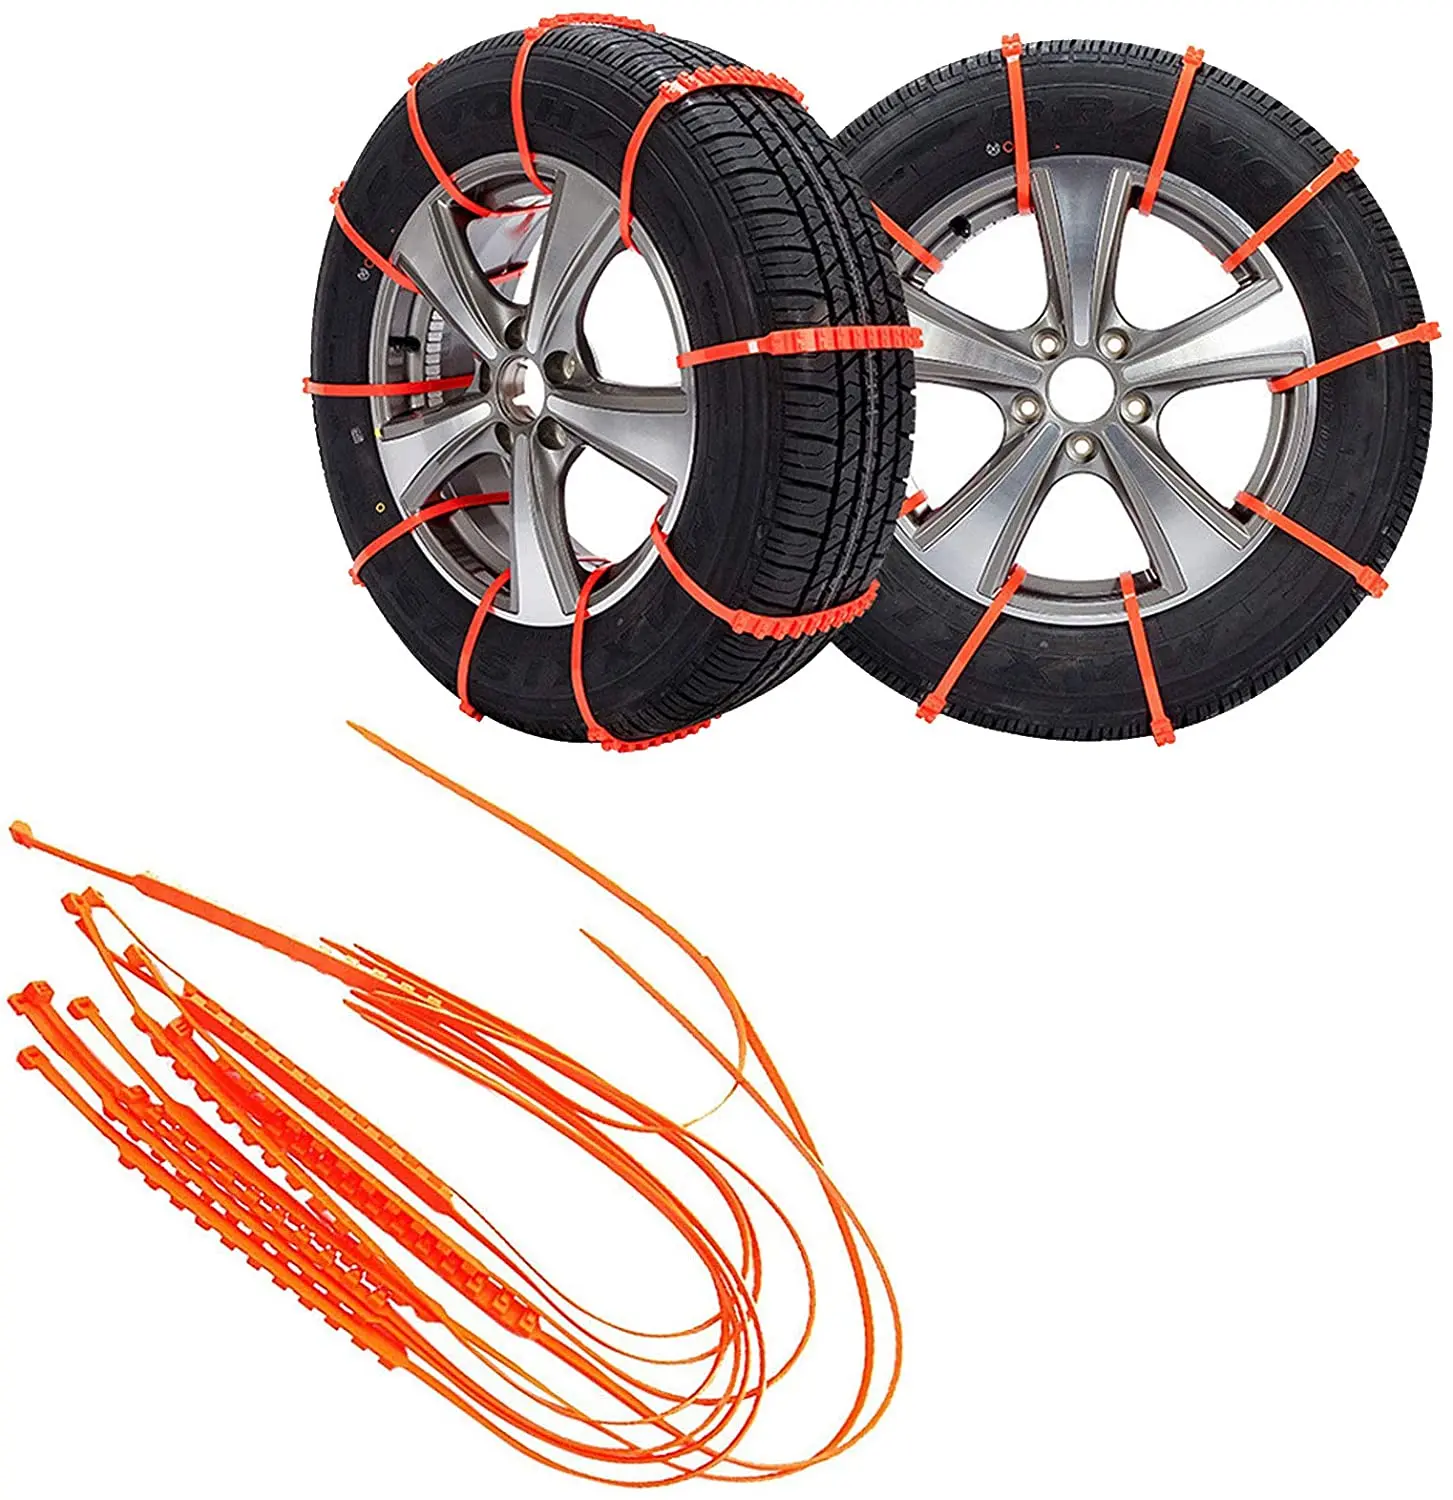 Universal Winter Car Anti-skid Cable Ties Snow Chains Off-road Vehicle Tire Wheels Tyre Cable Belt Non-slip Outdoor Emergency